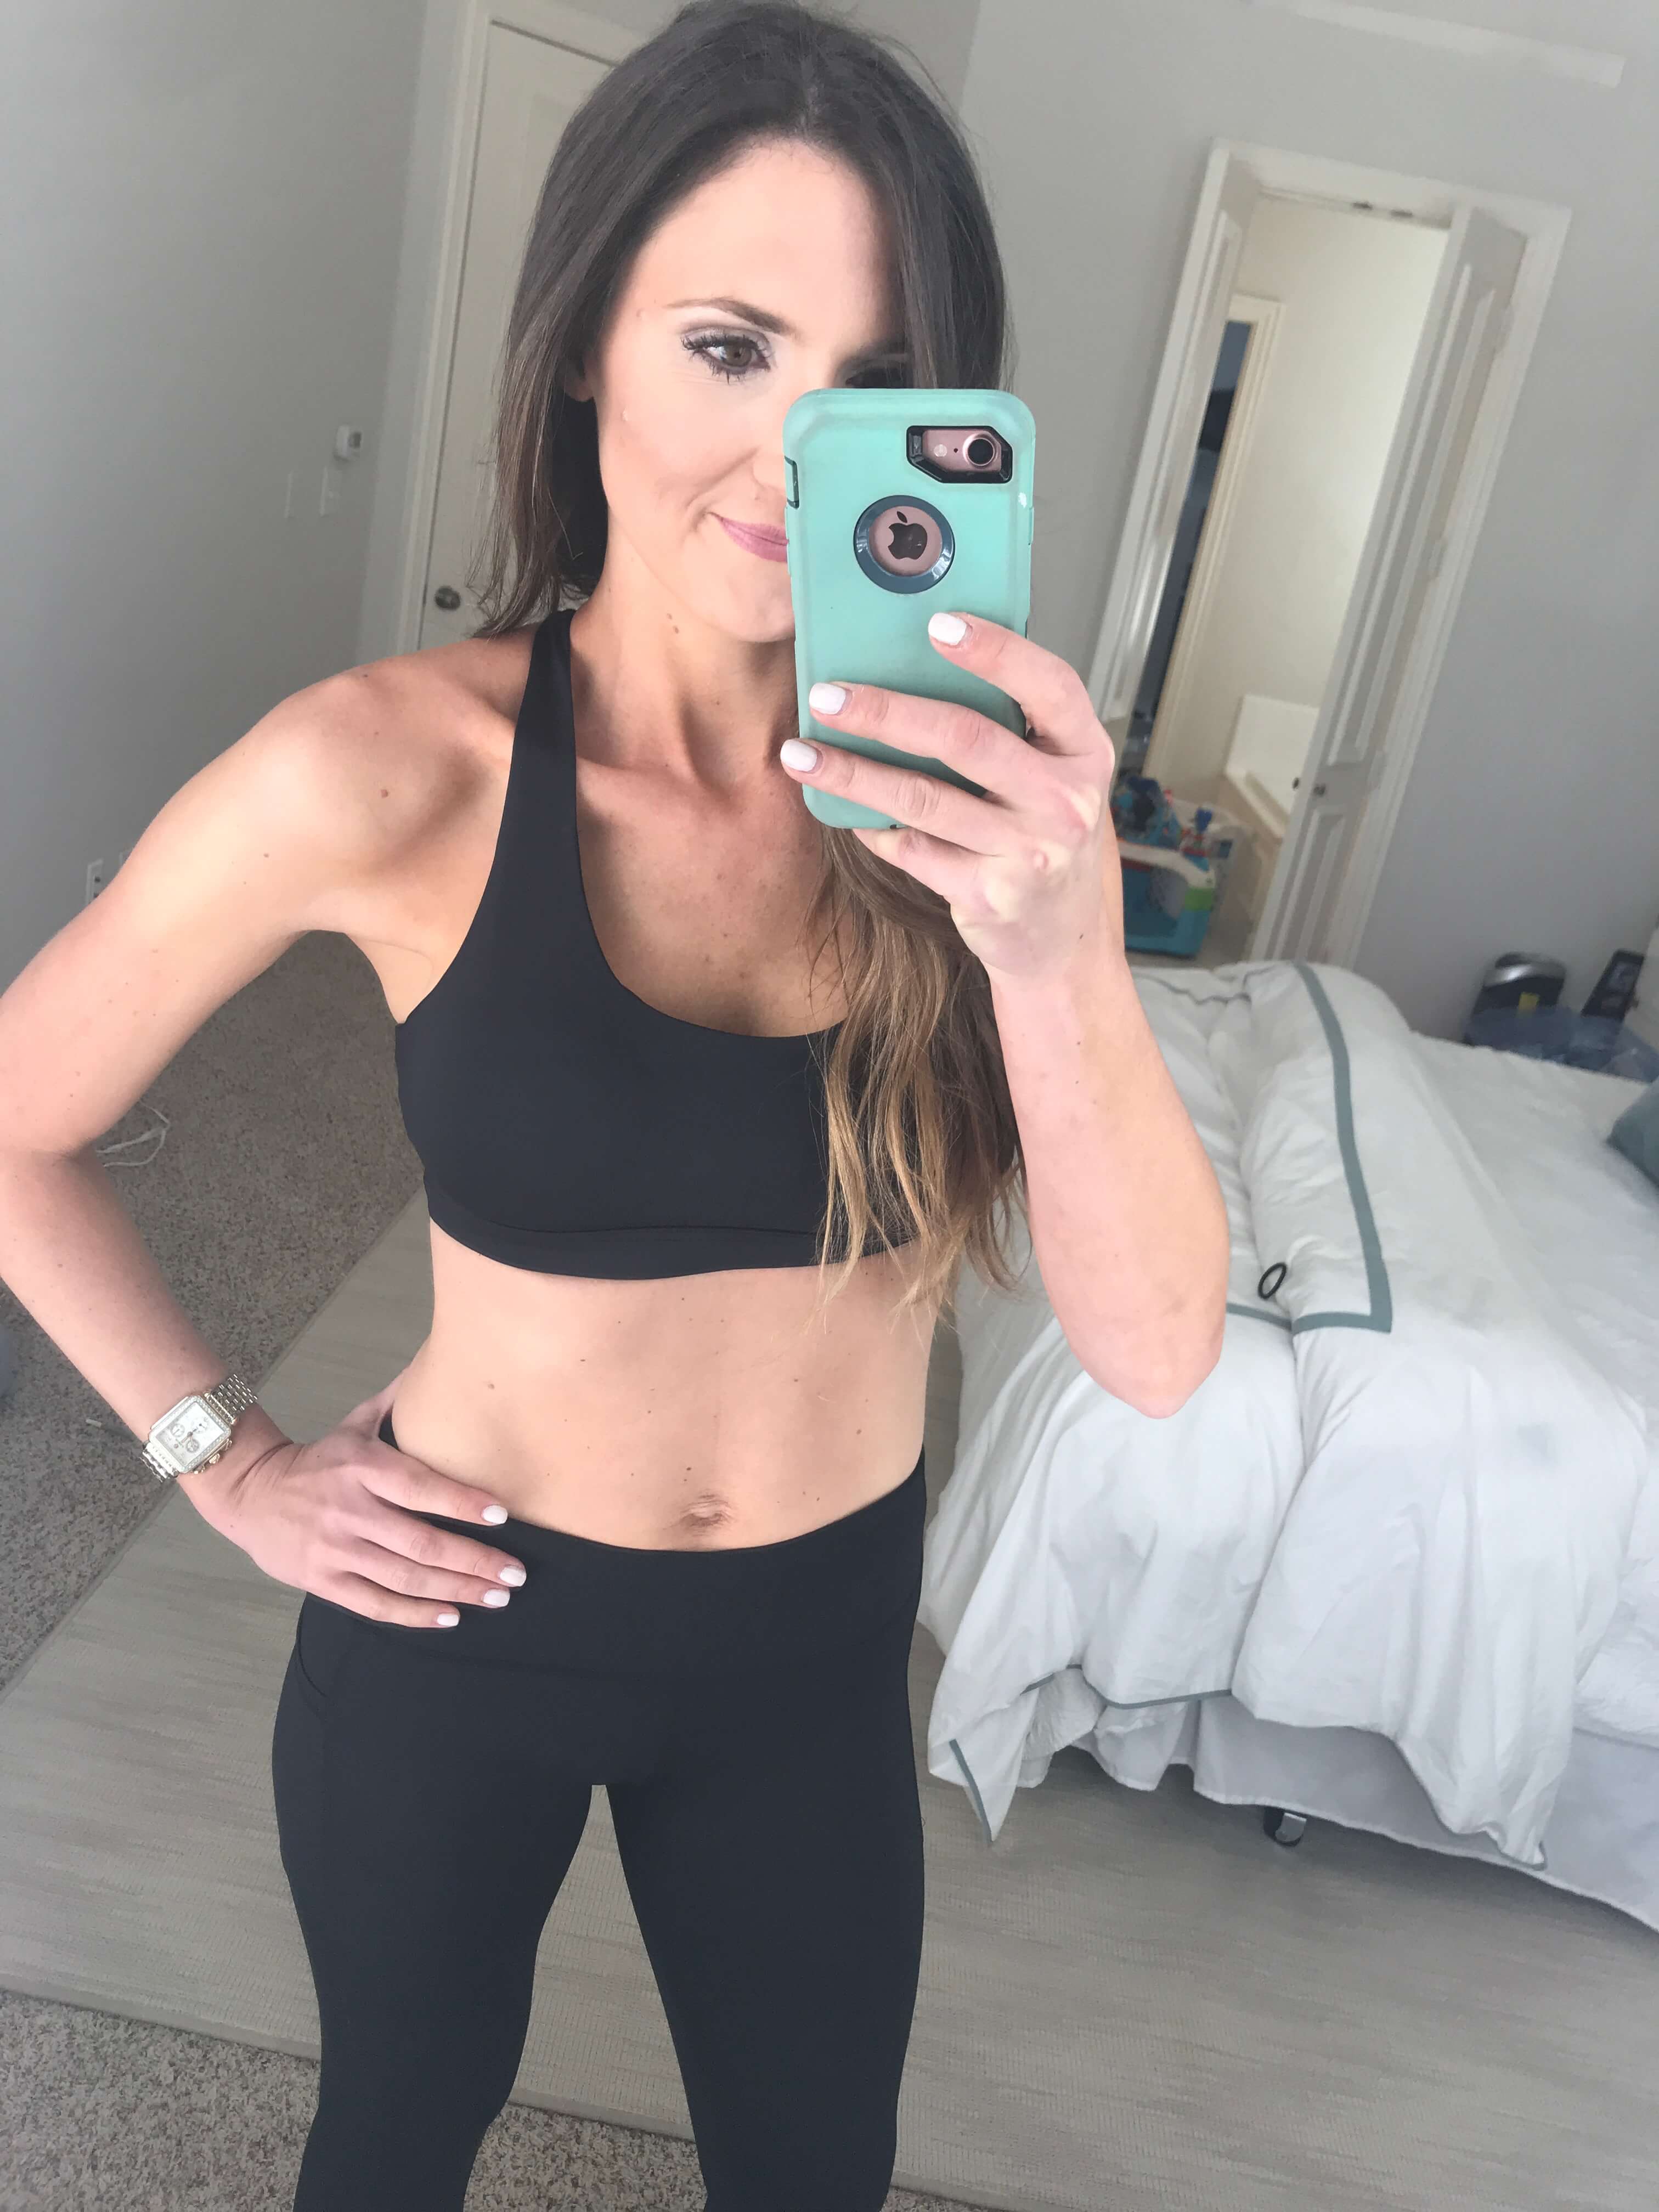 Workout Wear Finds on Amazon